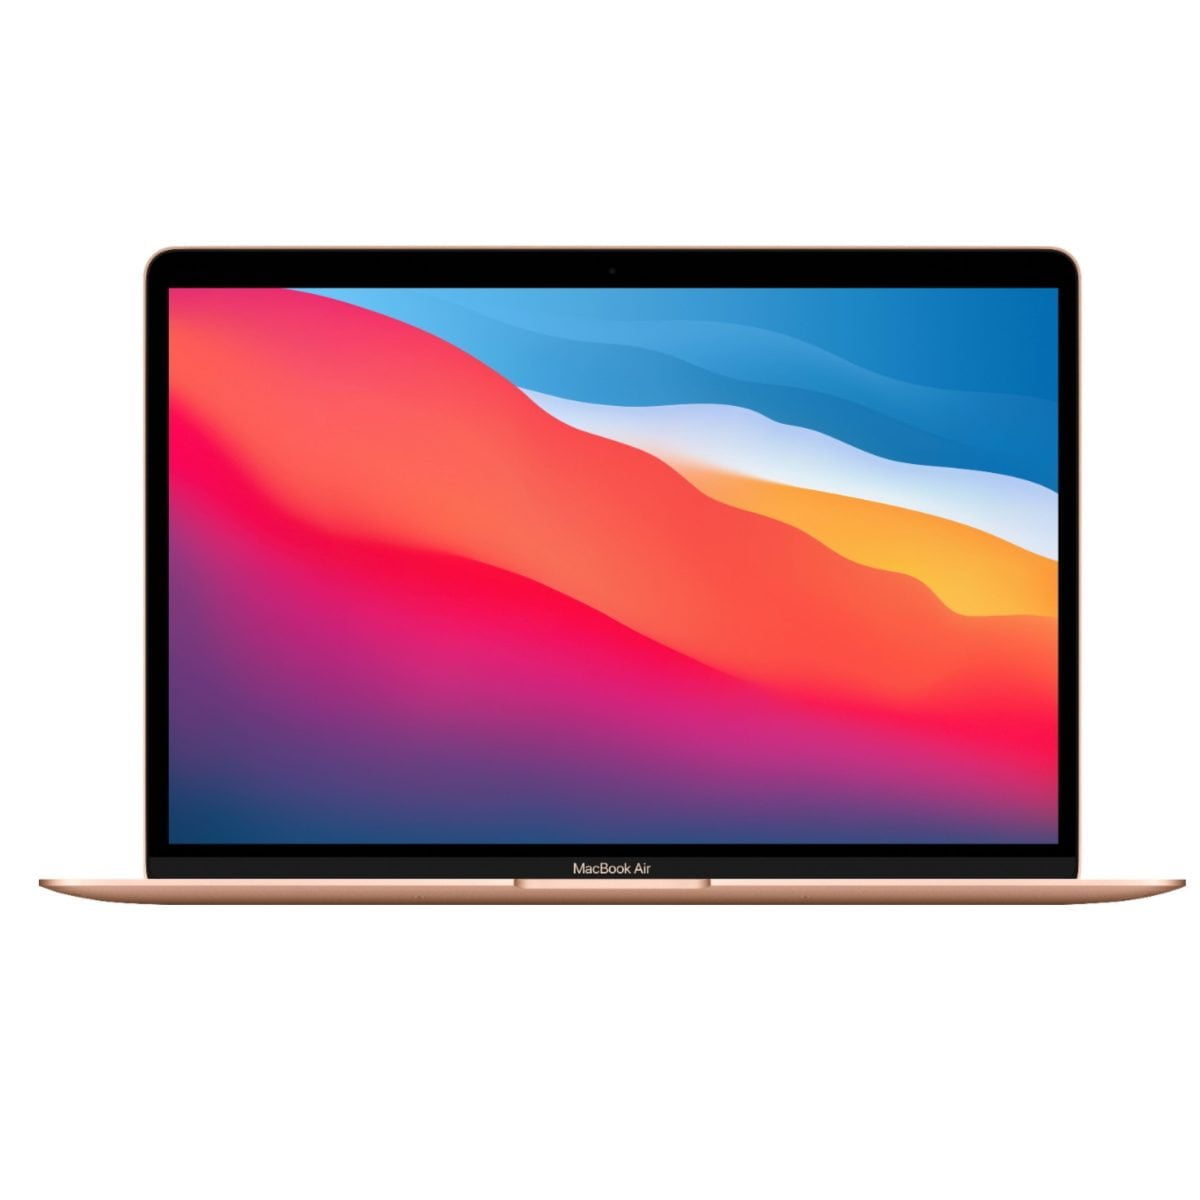 6418599 Sd Scaled Apple &Amp;Lt;H1 Class=&Amp;Quot;Heading-5 V-Fw-Regular&Amp;Quot;&Amp;Gt;Macbook Air 13&Amp;Quot; Laptop - Apple M1 Chip - 8Gb Memory - 512Gb Ssd (Latest Model) - Gold (English Keyboard)&Amp;Lt;/H1&Amp;Gt; Https://Www.youtube.com/Watch?V=Hs1Hols4Sd0 &Amp;Lt;Span Class=&Amp;Quot;Product-Data-Label Body-Copy&Amp;Quot;&Amp;Gt;&Amp;Lt;Strong&Amp;Gt;Model&Amp;Lt;/Strong&Amp;Gt;:&Amp;Lt;/Span&Amp;Gt;&Amp;Lt;Span Class=&Amp;Quot;Product-Data-Value Body-Copy&Amp;Quot;&Amp;Gt;Mgnn3, &Amp;Lt;/Span&Amp;Gt;Apple Macbook Air 13 Thinnest And Lightest Notebook Gets Supercharged With The Apple M1 Chip. Tackle Your Projects With The Blazing-Fast 8-Core Cpu. Take Graphics-Intensive Apps And Games To The Next Level With The 8-Core Gpu. And Accelerate Machine Learning Tasks With The 16-Core Neural Engine. Macbook Air Macbook Air 13&Amp;Quot; Laptop - Apple M1 Chip - 8Gb Memory - 512Gb Ssd (Mgnn3) - Gold